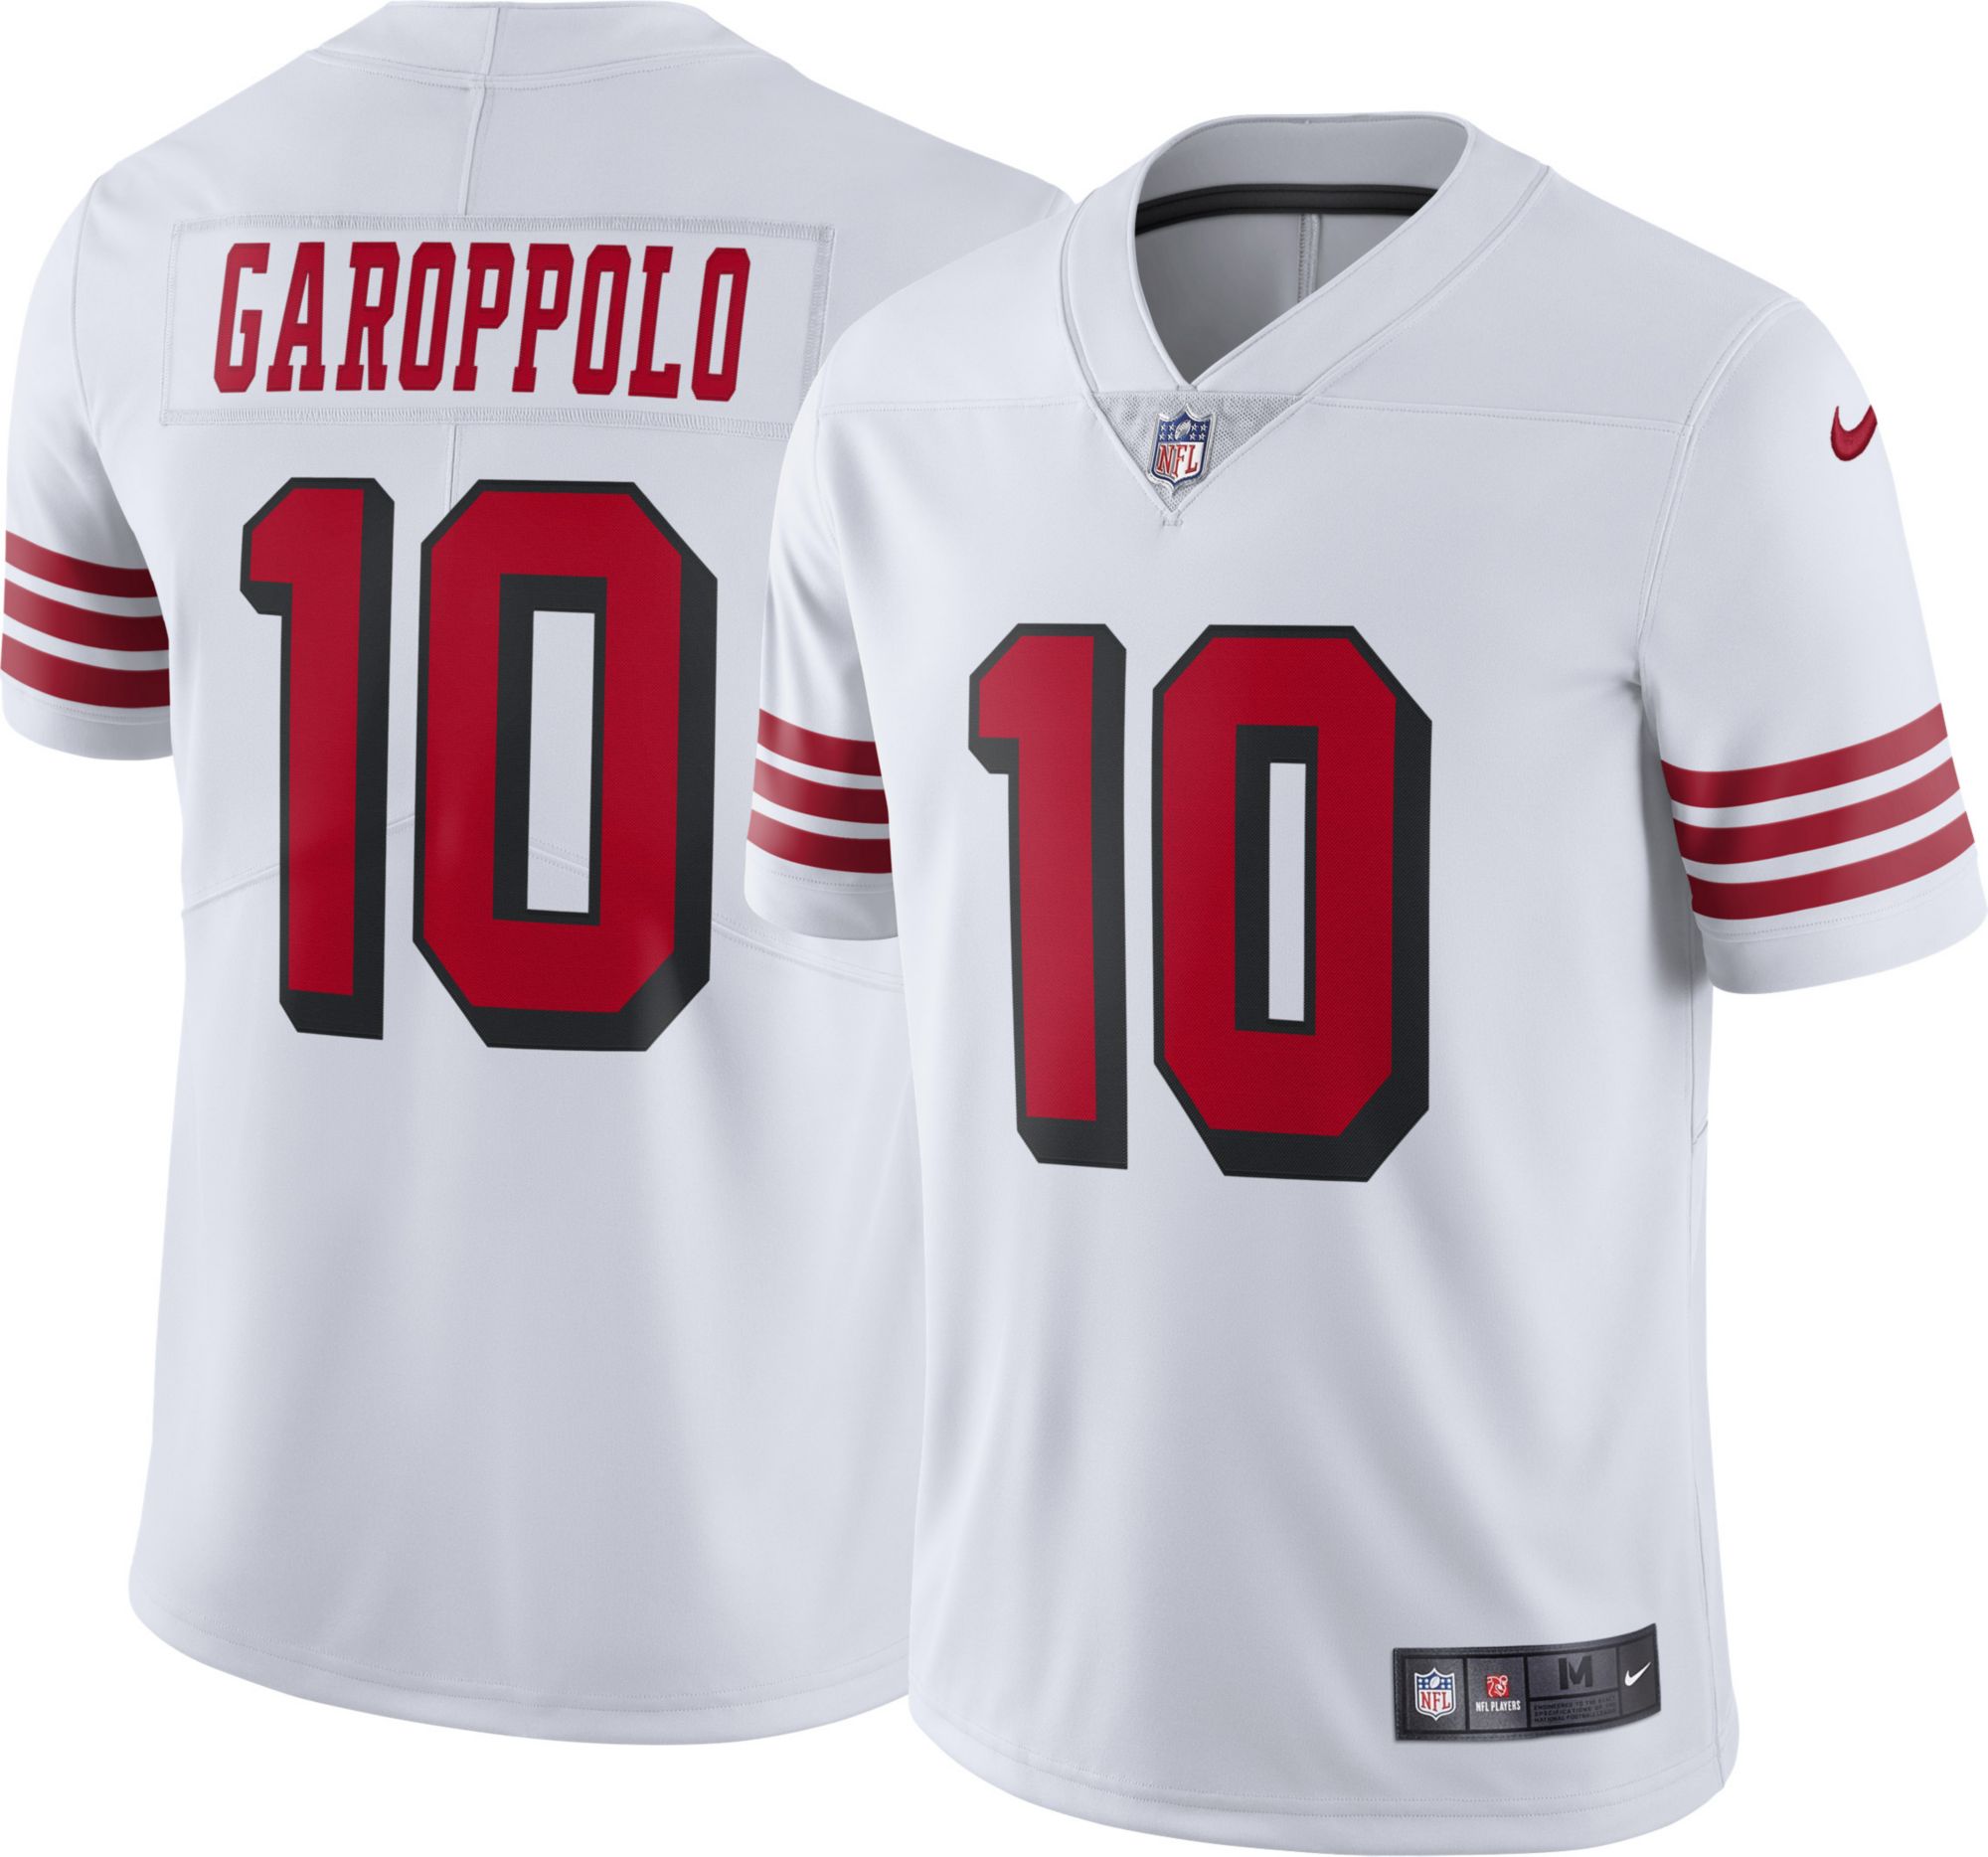 most popular 49ers jersey